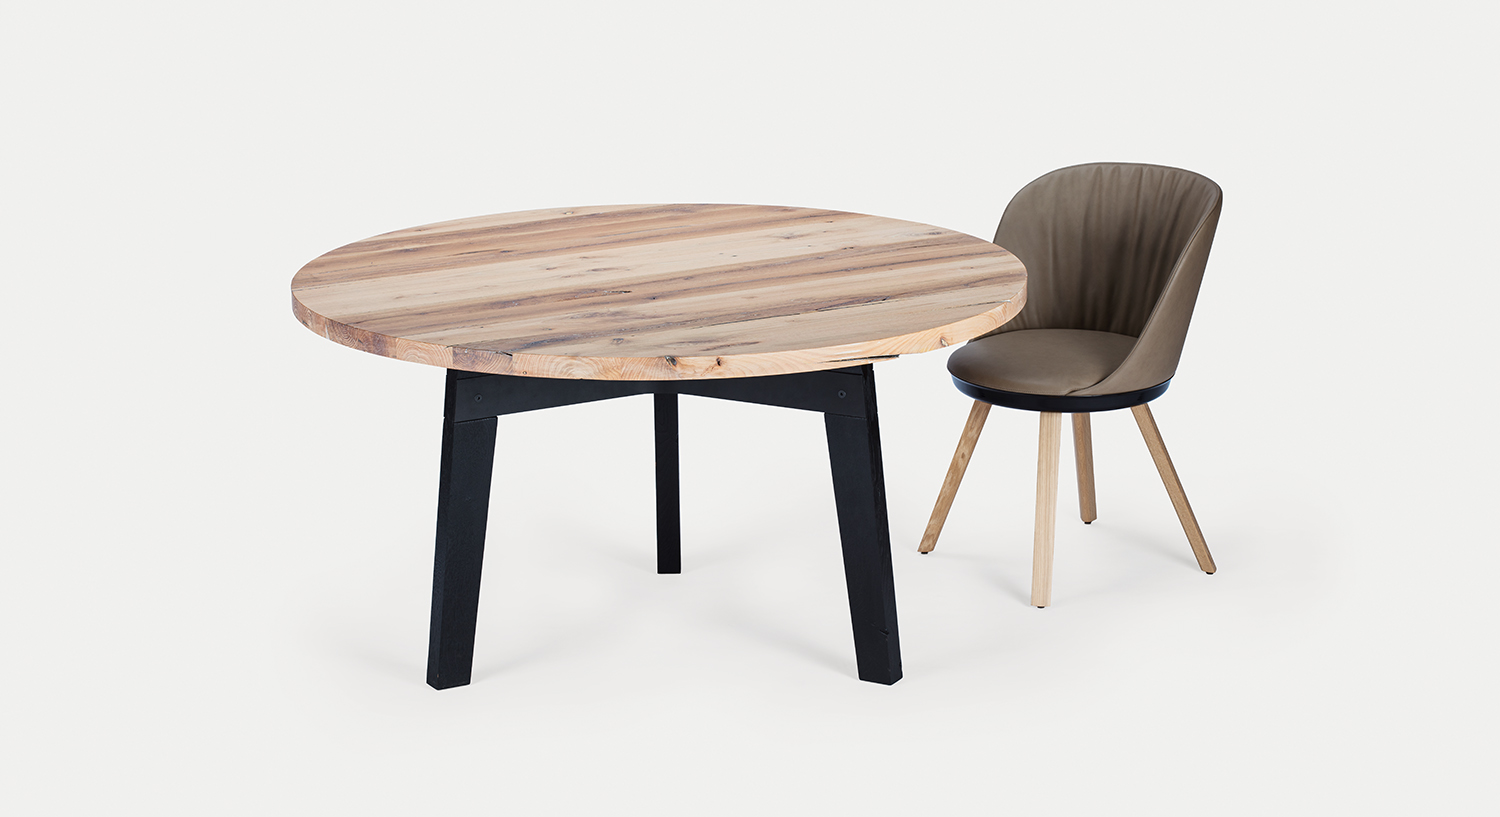 BB 31 Connect round | JANUA